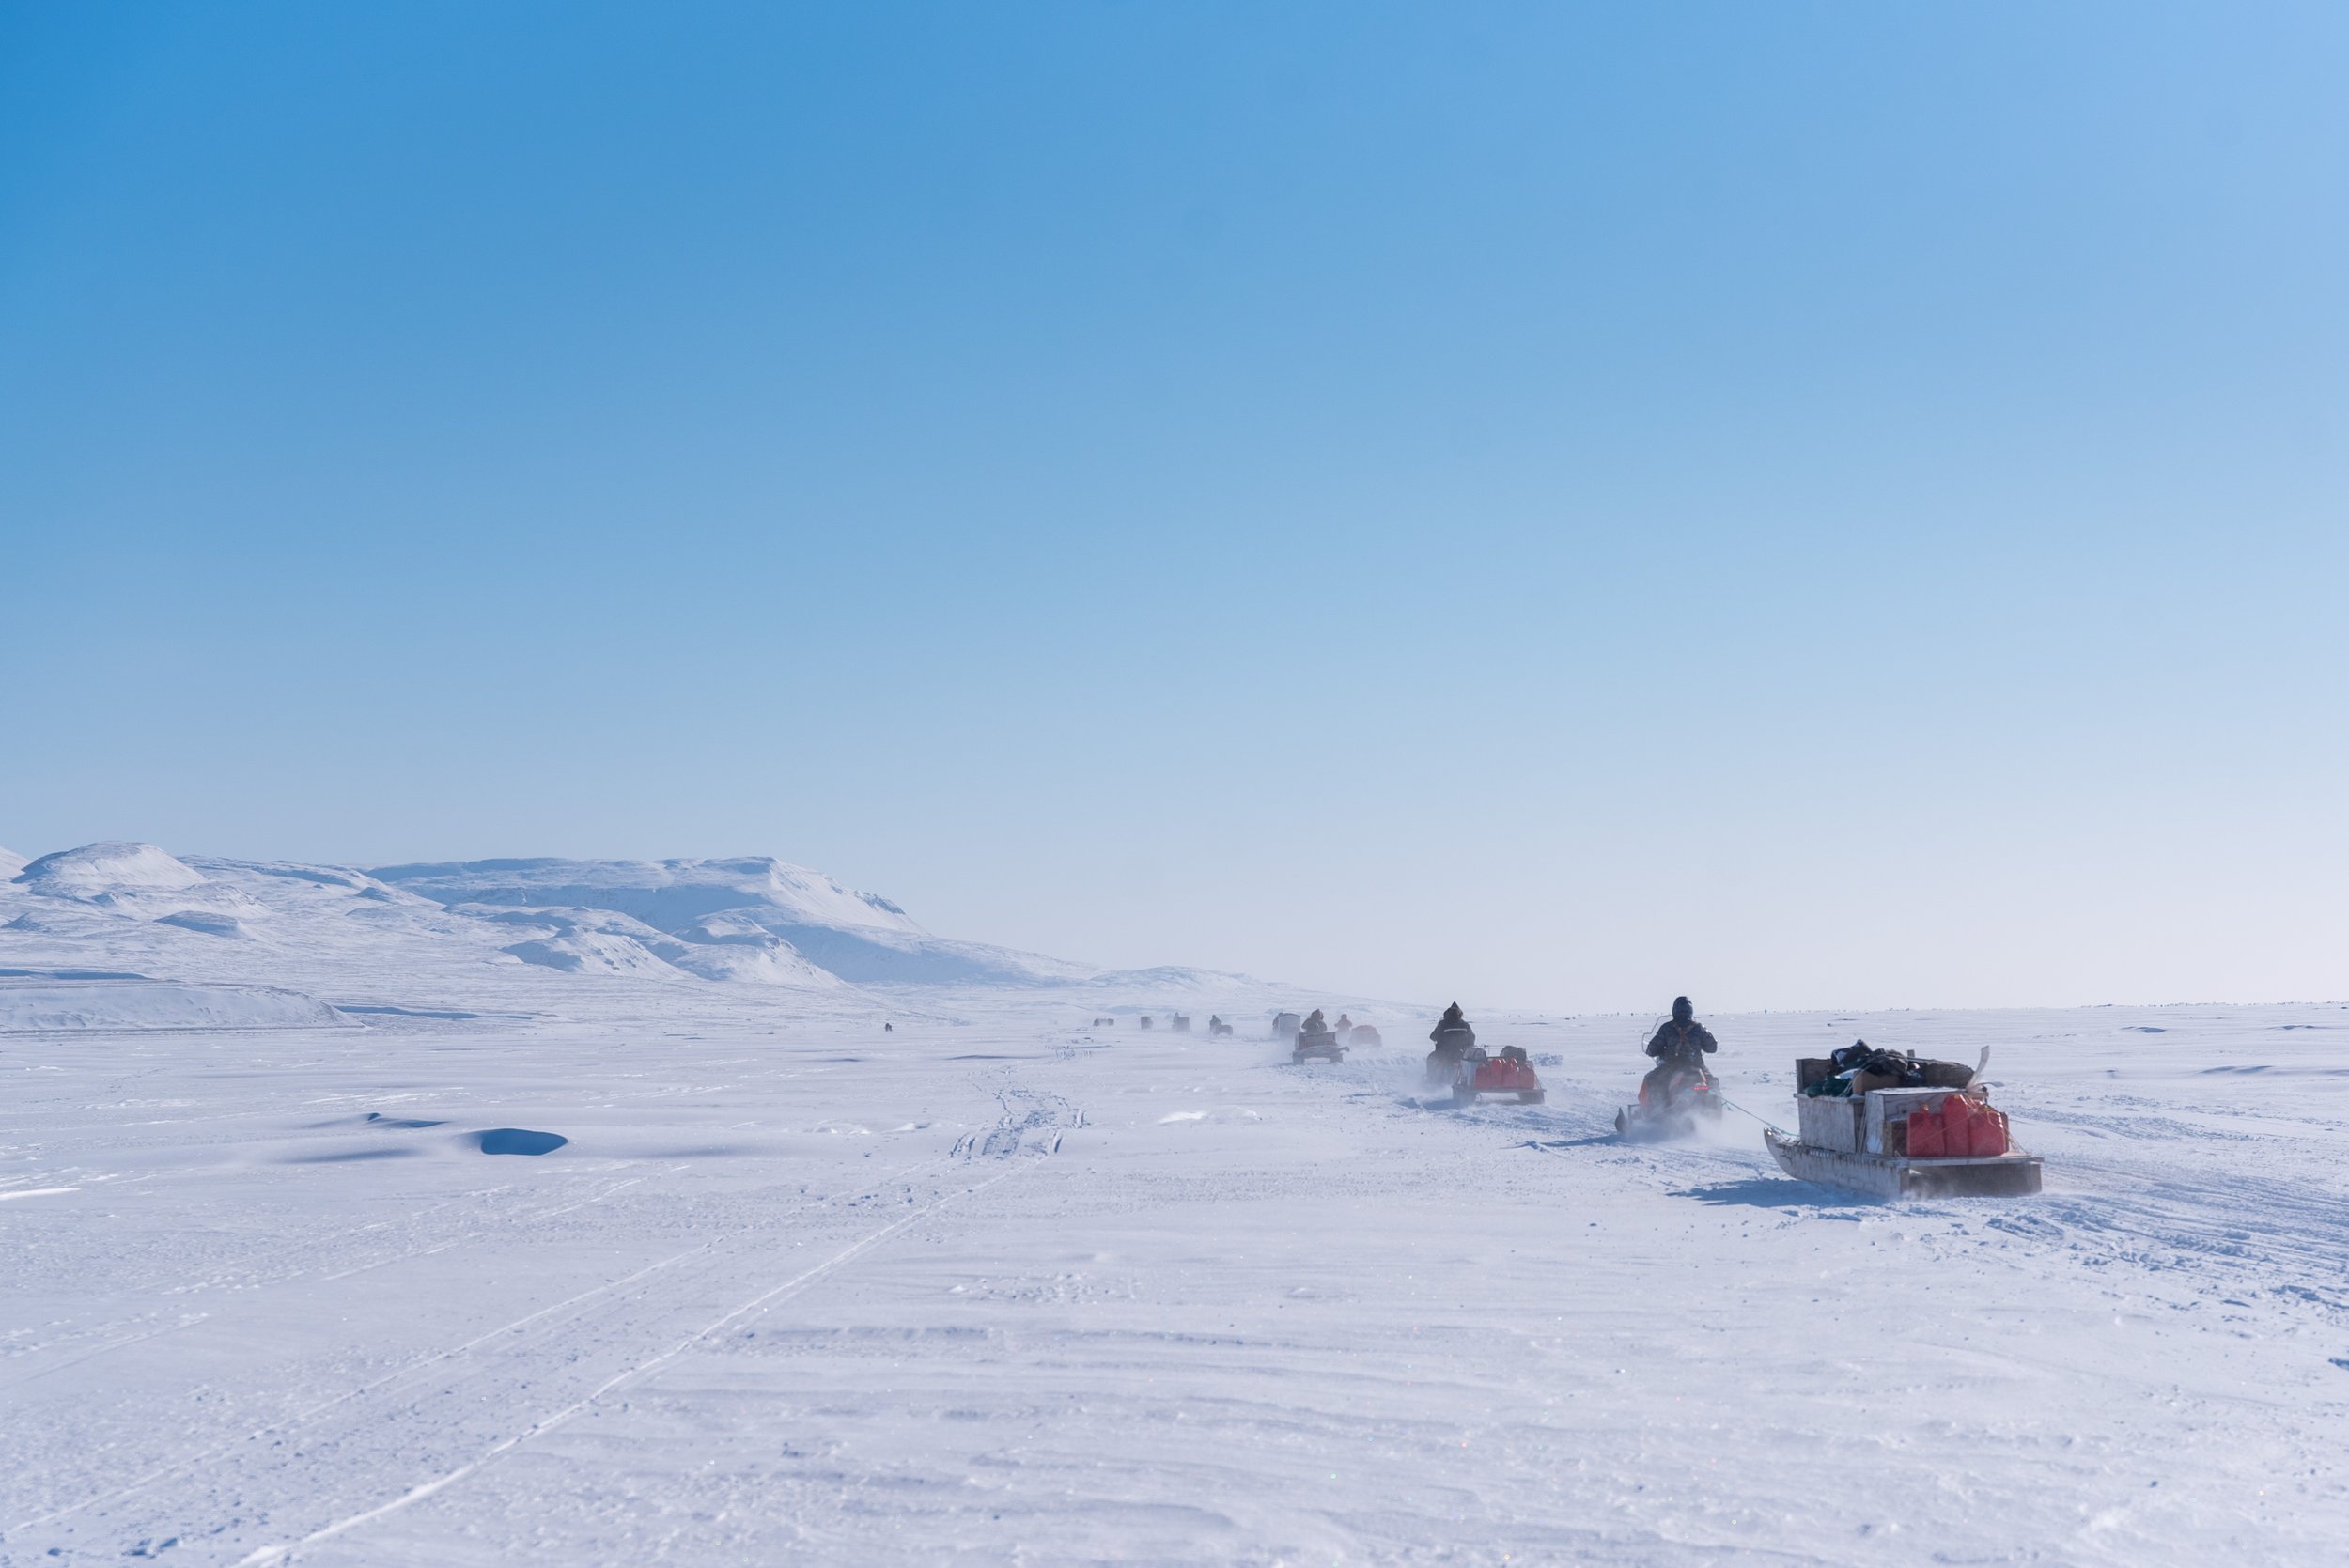  A convoy of support snowmobiles with qamutiik in tow head toward the first Nunavut Quest camp, roughly 50km outside of Arctic Bay, Nunavut on Monday, April 18, 2022. Taken for The Canadian Press 